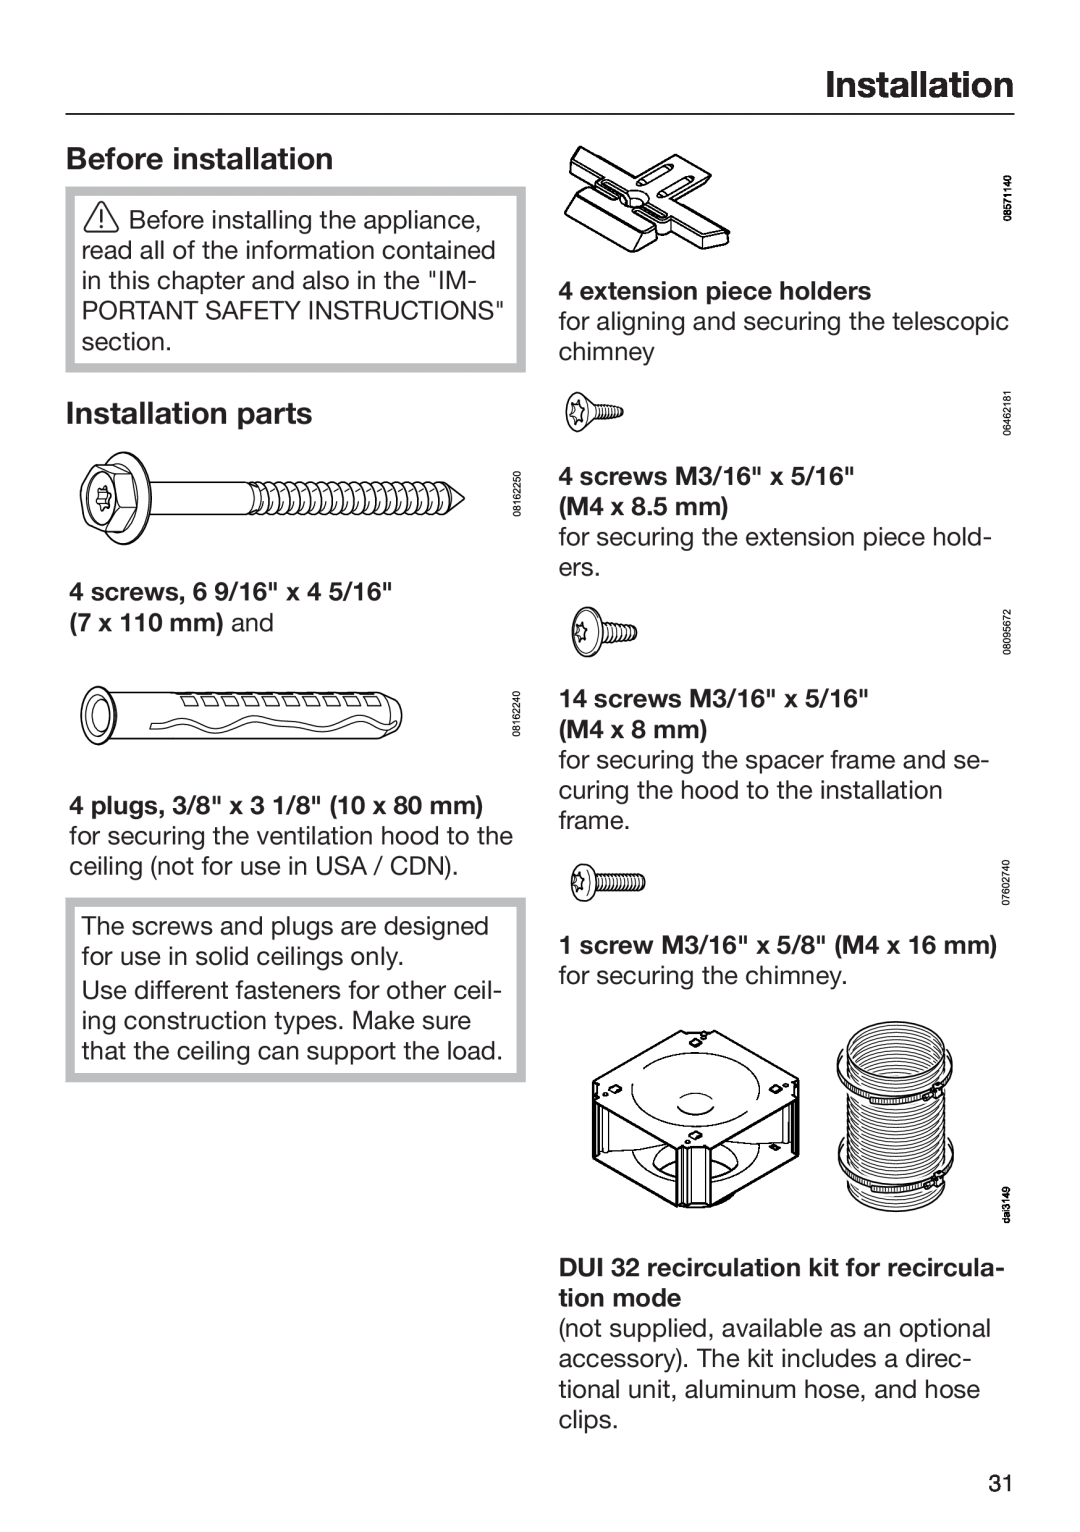 Miele M.-Nr. 09 805 980 installation instructions Before installation, Installation parts, extension piece holders 